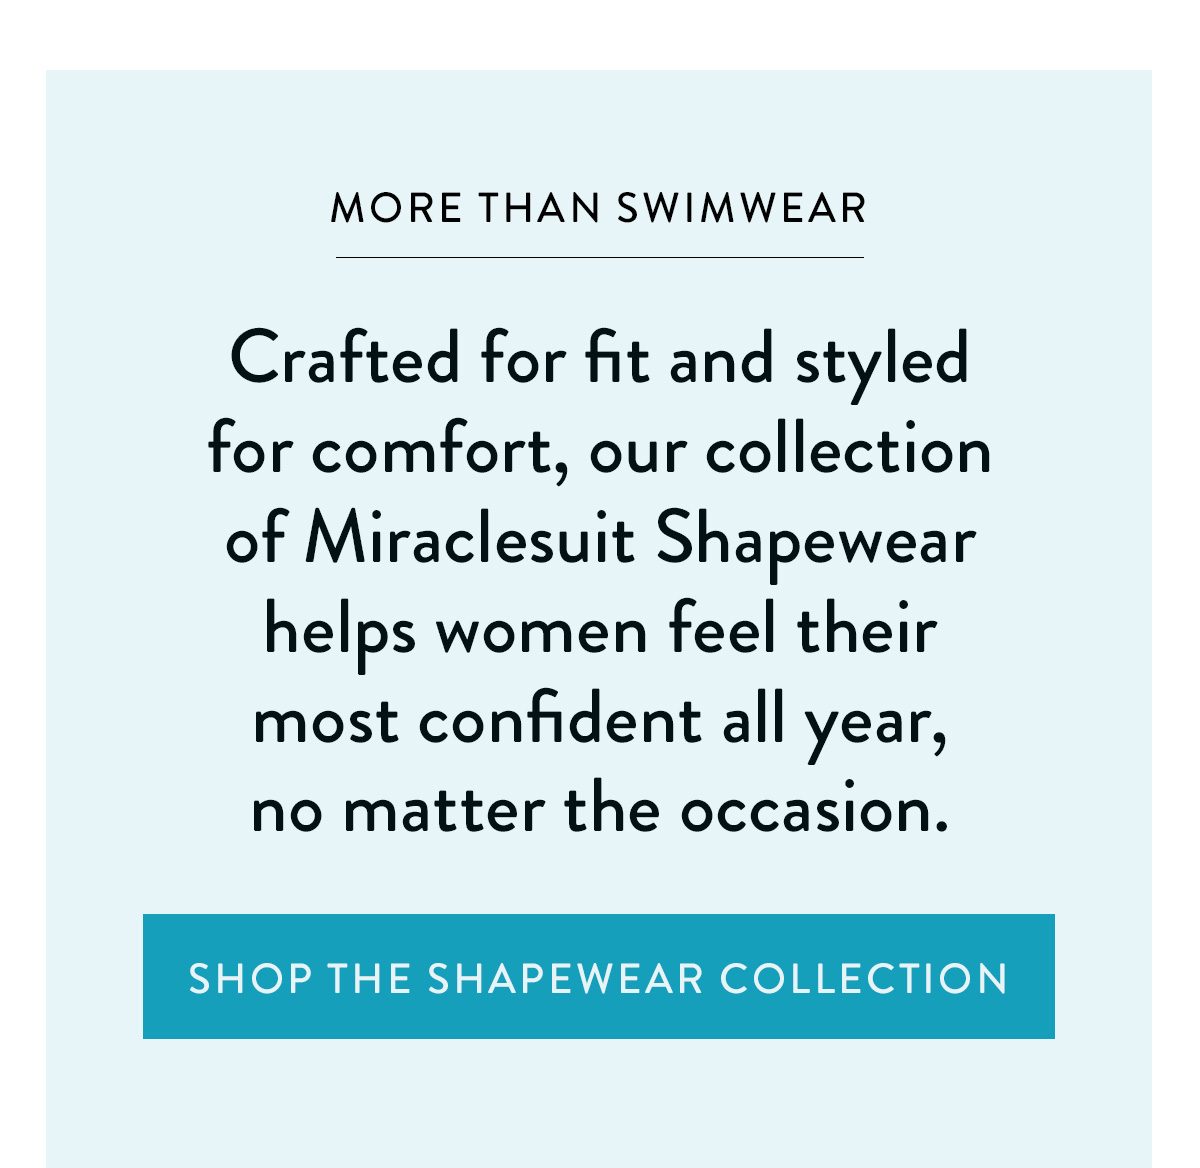 MORE THAN SWIMWEAR Crafted for fit and styled for comfort, our collection of Miraclesuit Shapewear helps women feel their most confident all year, no matter the occasion. Shop the Shapewear Collection >